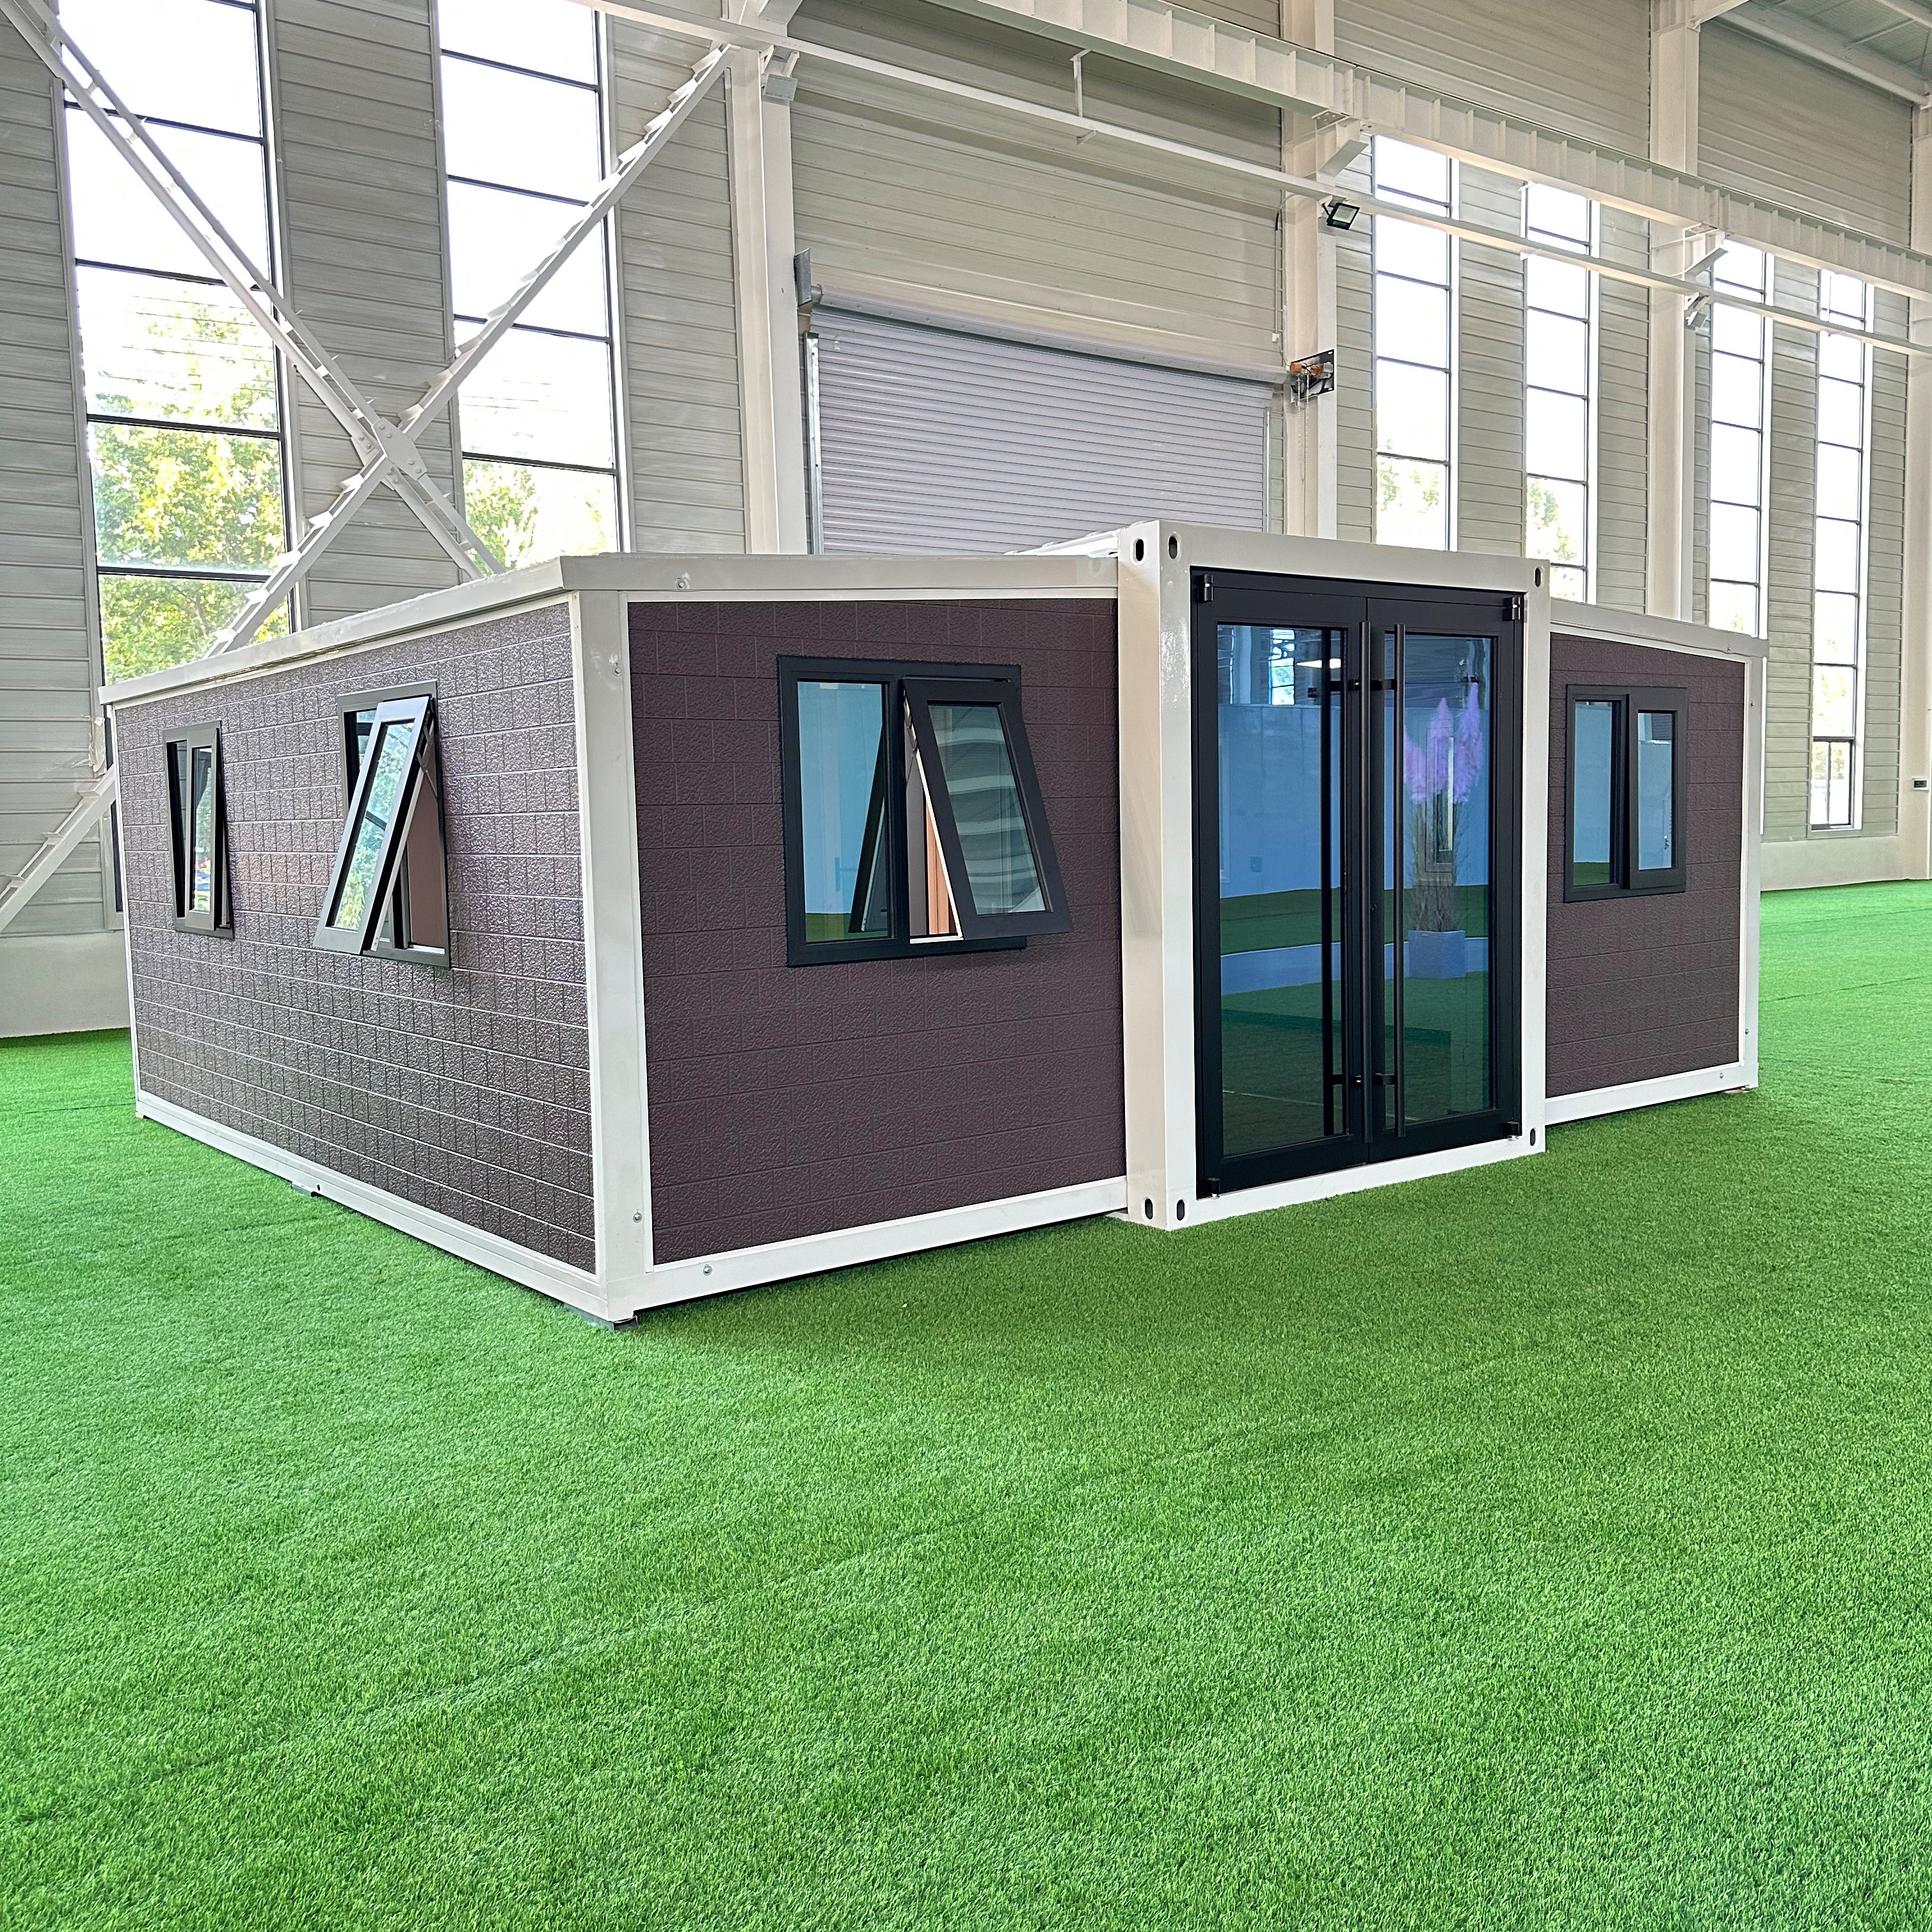 The double wing folding house turns into three rooms every five minutes